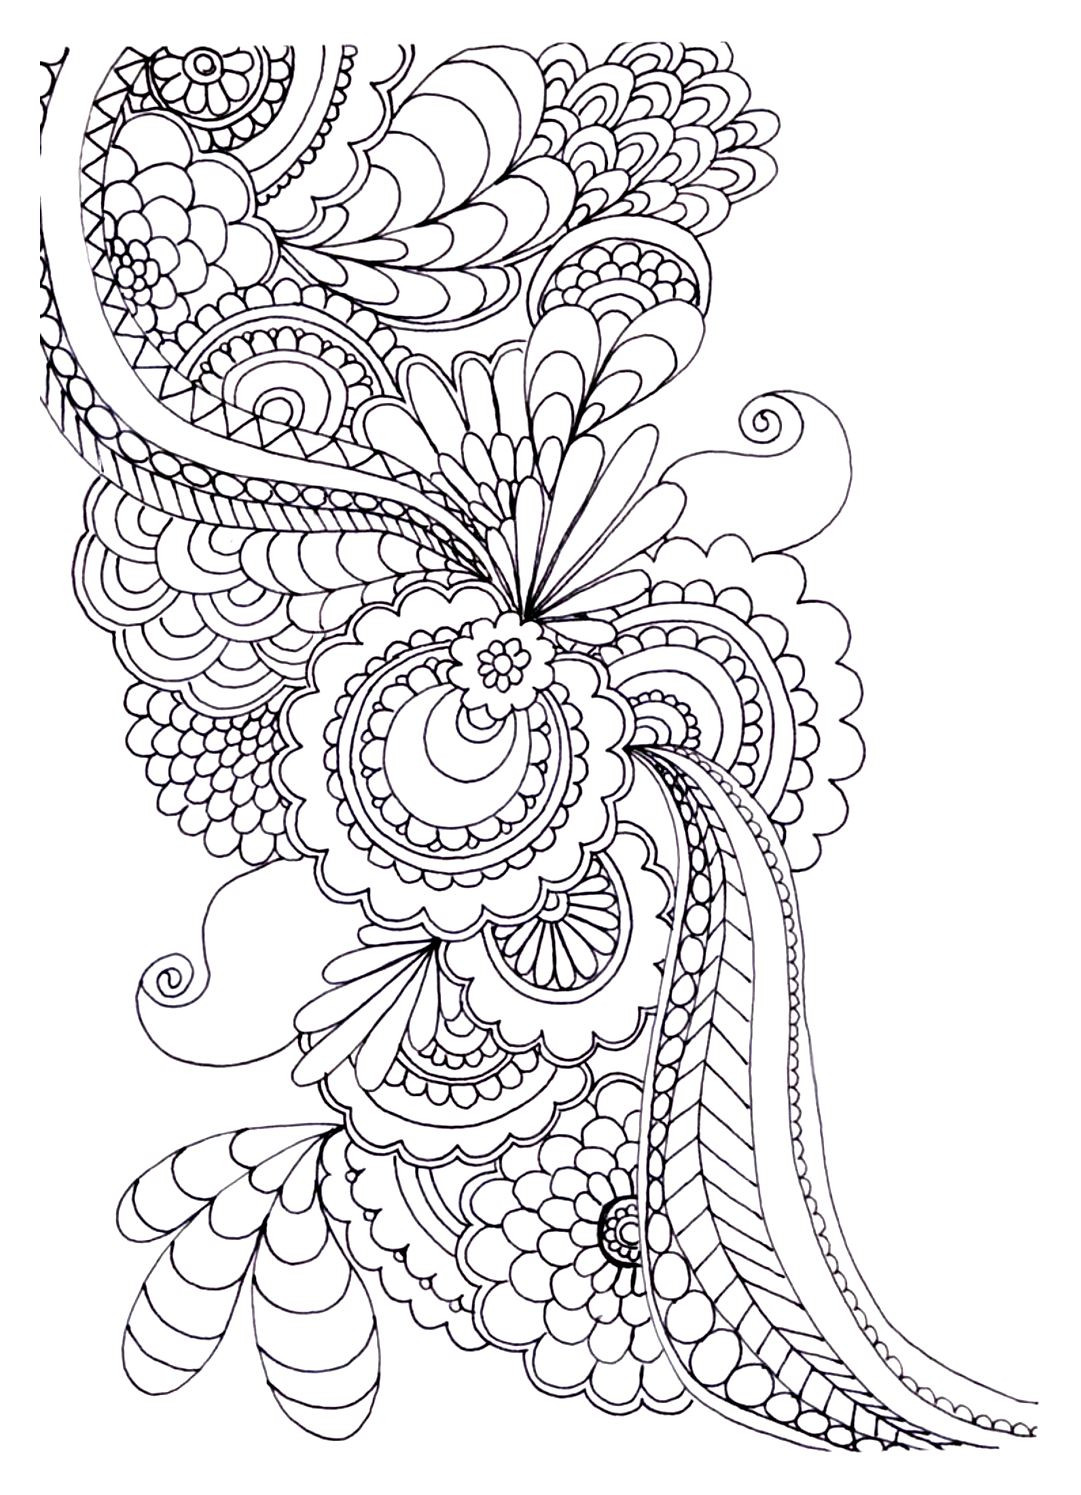 Adult Coloring Pages Pinterest
 20 Free Adult Colouring Pages The Organised Housewife